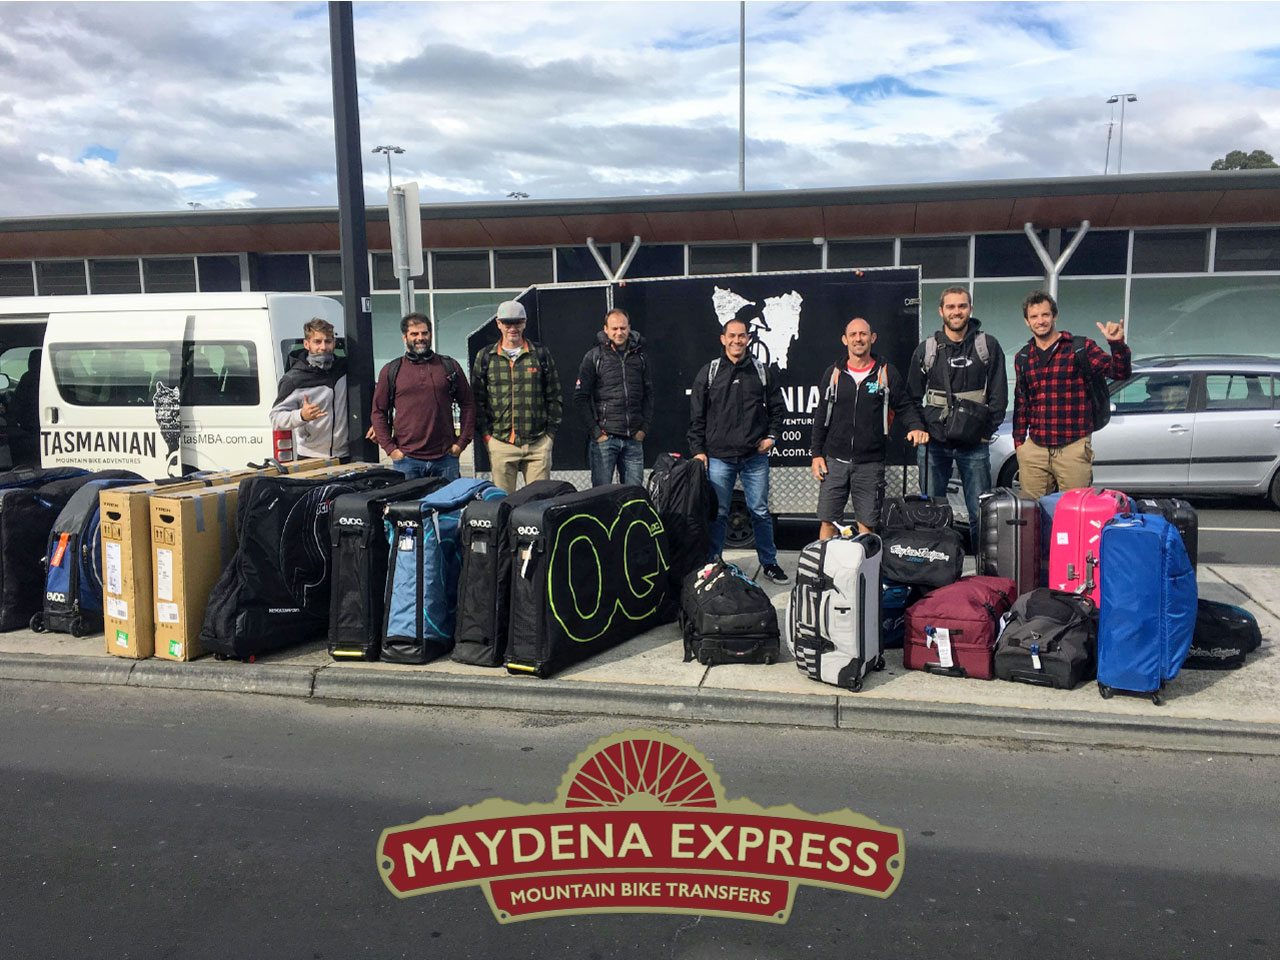 Maydena Express - Private group transfer from Hobart Airport to Maydena Bike Park. Includes stop-off for provisions.